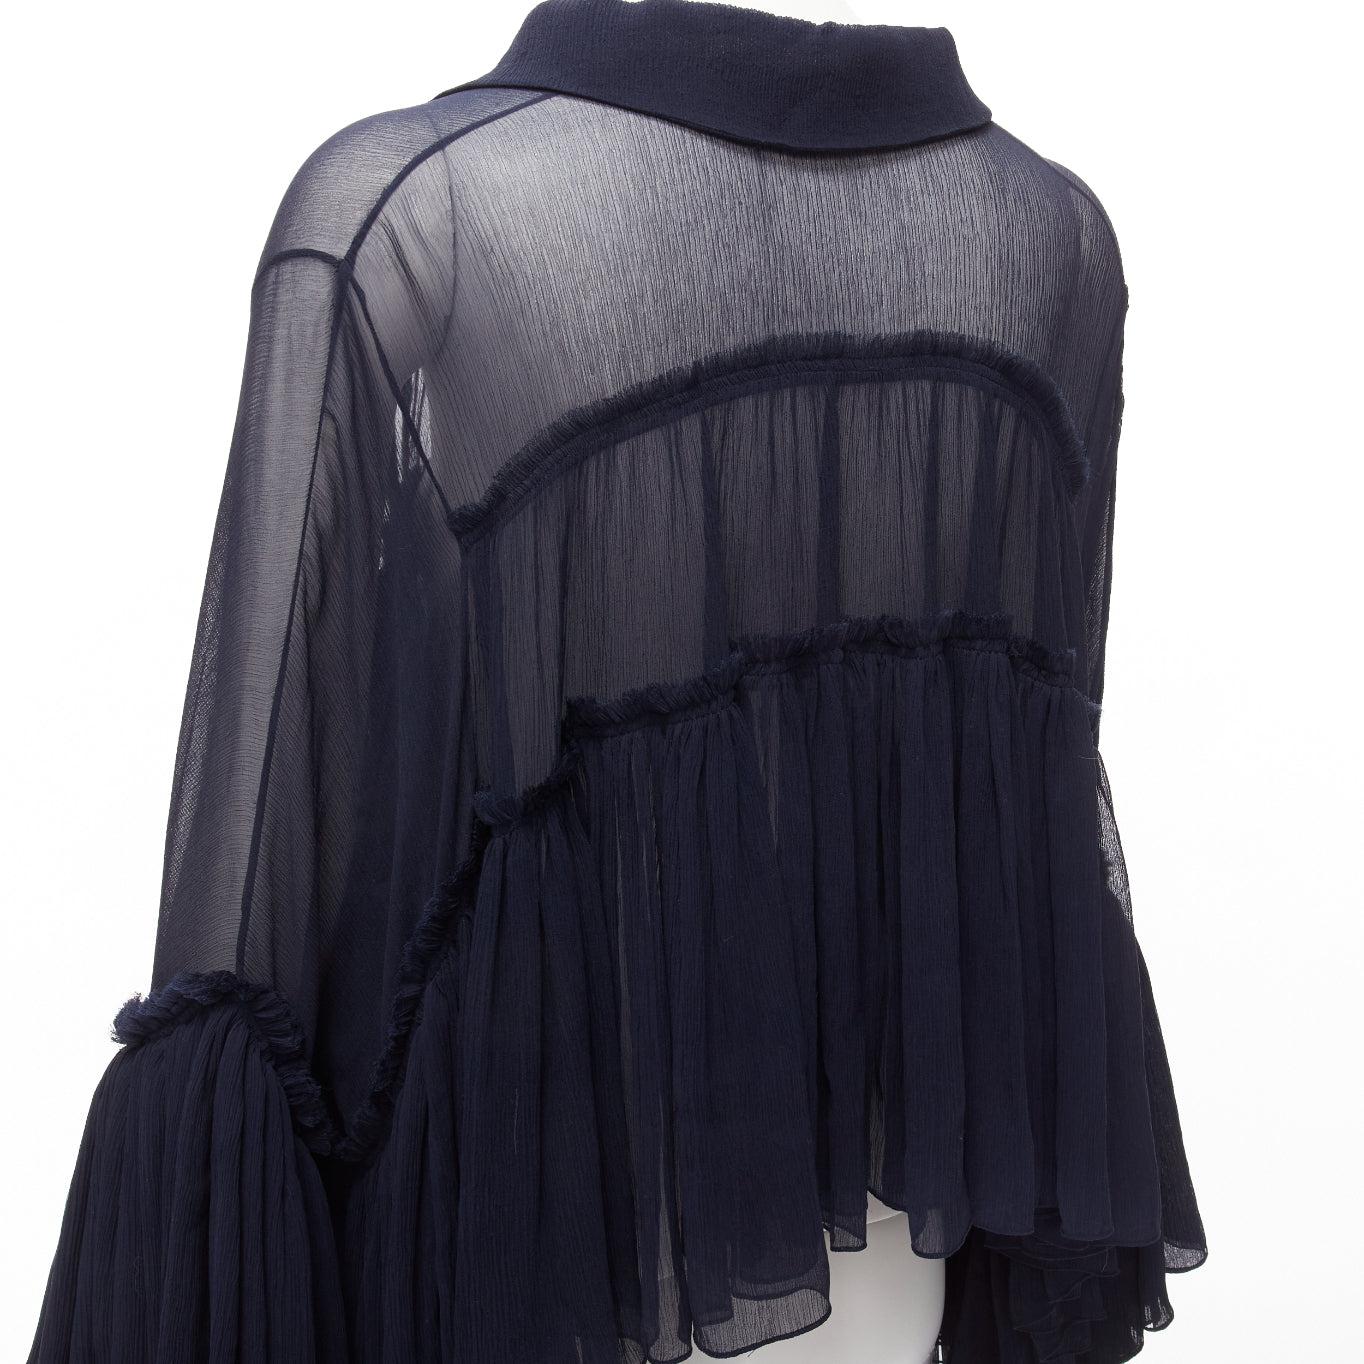 CHLOE 2015 Runway navy silk chiffon voluminous ruffle sleeve tie neck collared boho blouse
Reference: NILI/A00041
Brand: Chloe
Collection: 2015 - Runway
Material: Silk
Color: Navy
Pattern: Solid
Closure: Tie Neck
Extra Details: The most wonderful,